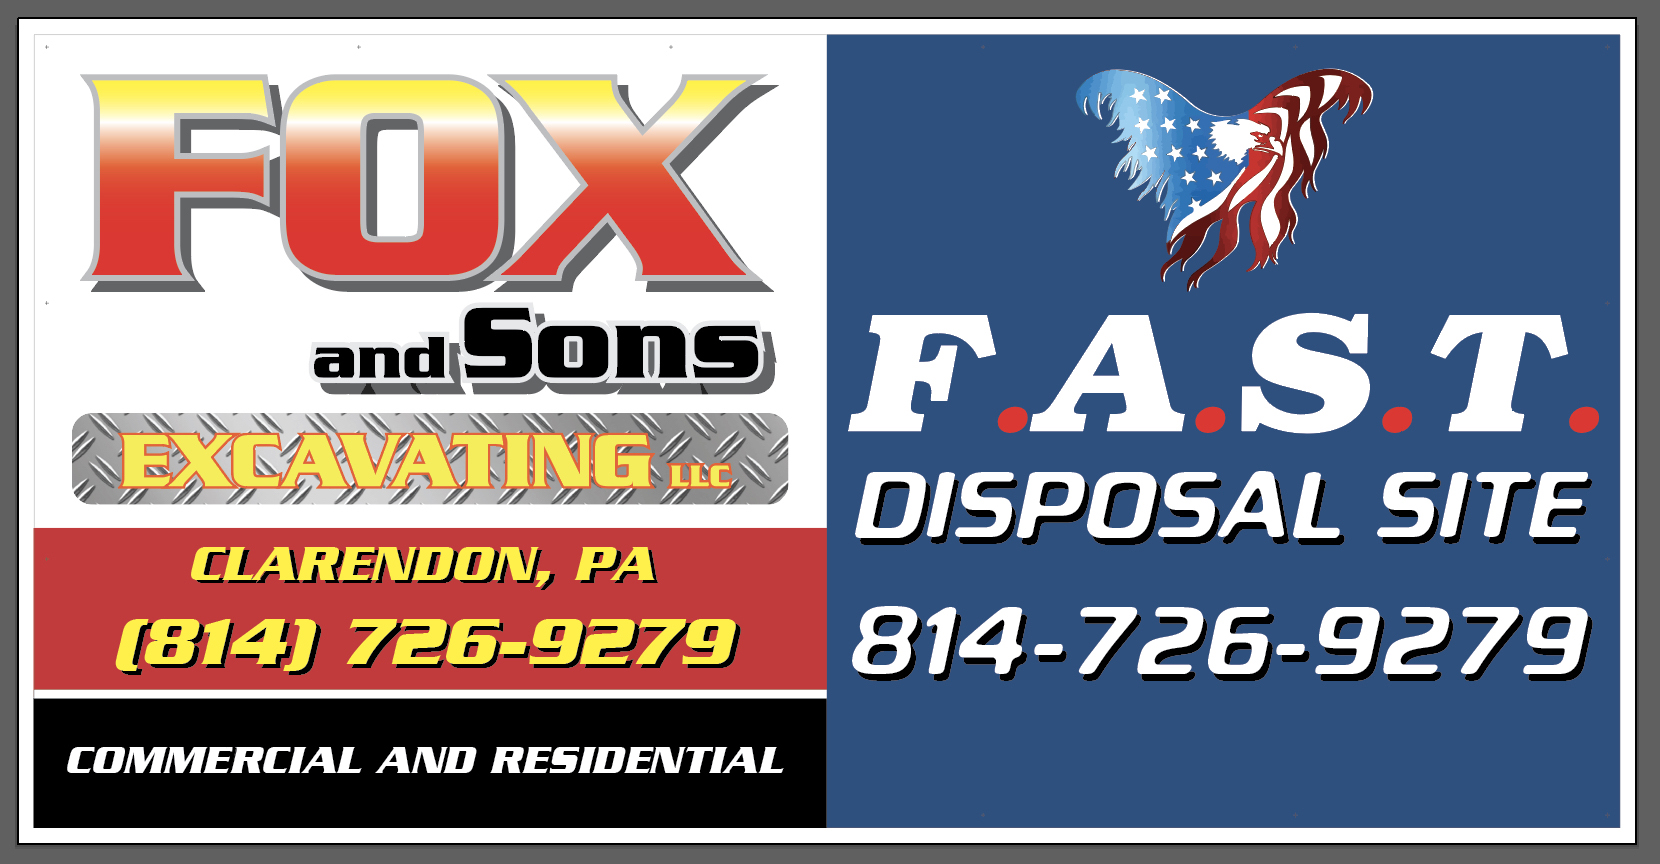 Fox & Sons Excavating / F.A.S.T. Disposal